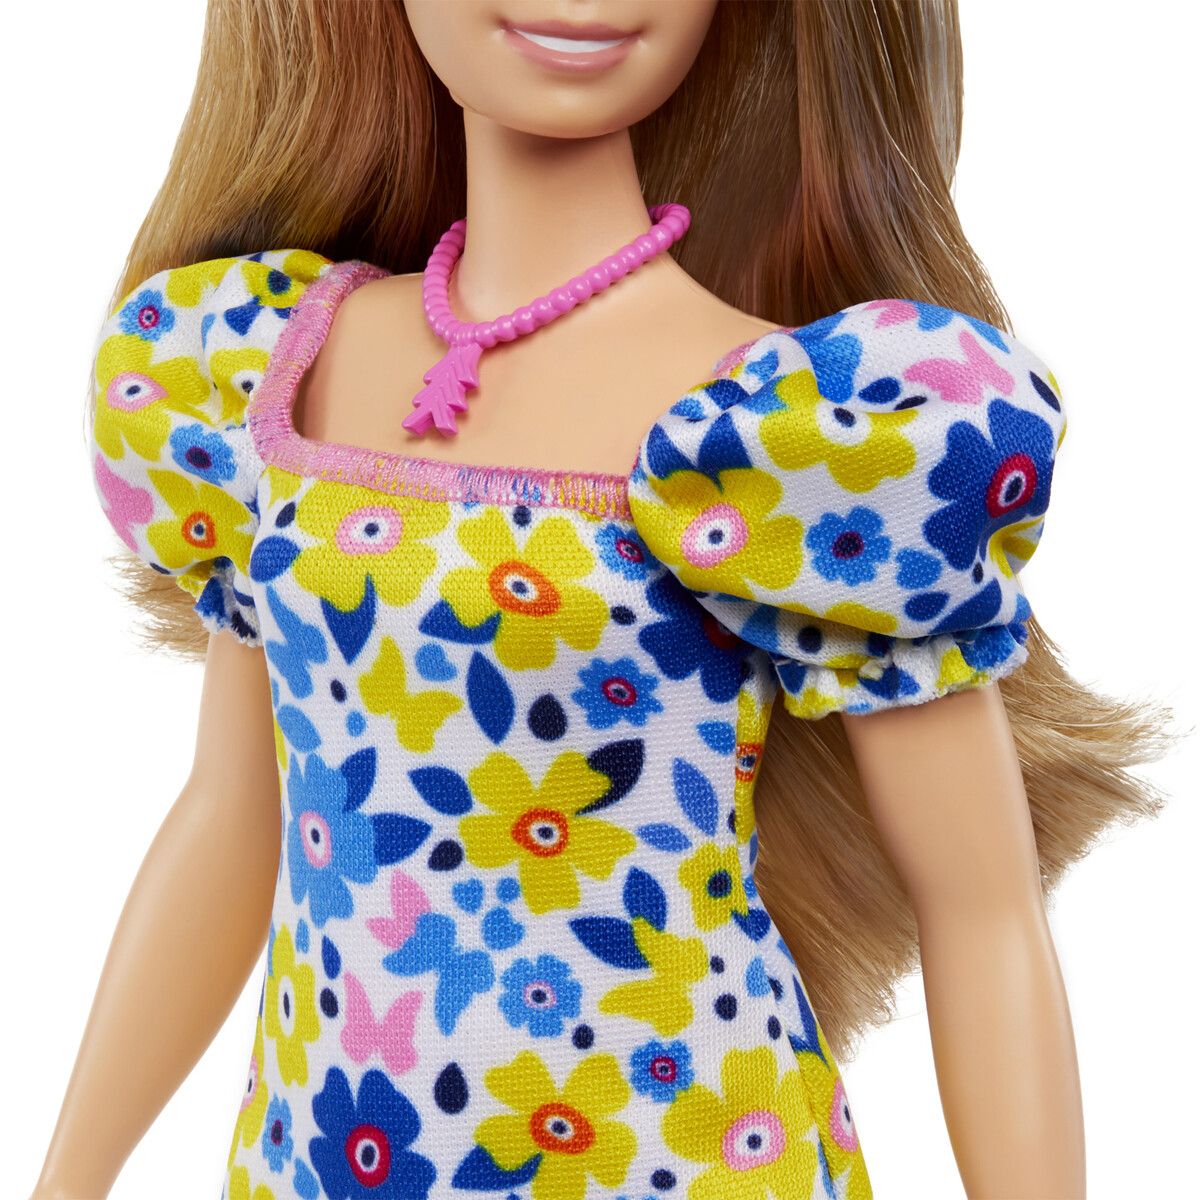 Barbie Fashionista Doll Yellow Blue Floral (DS)